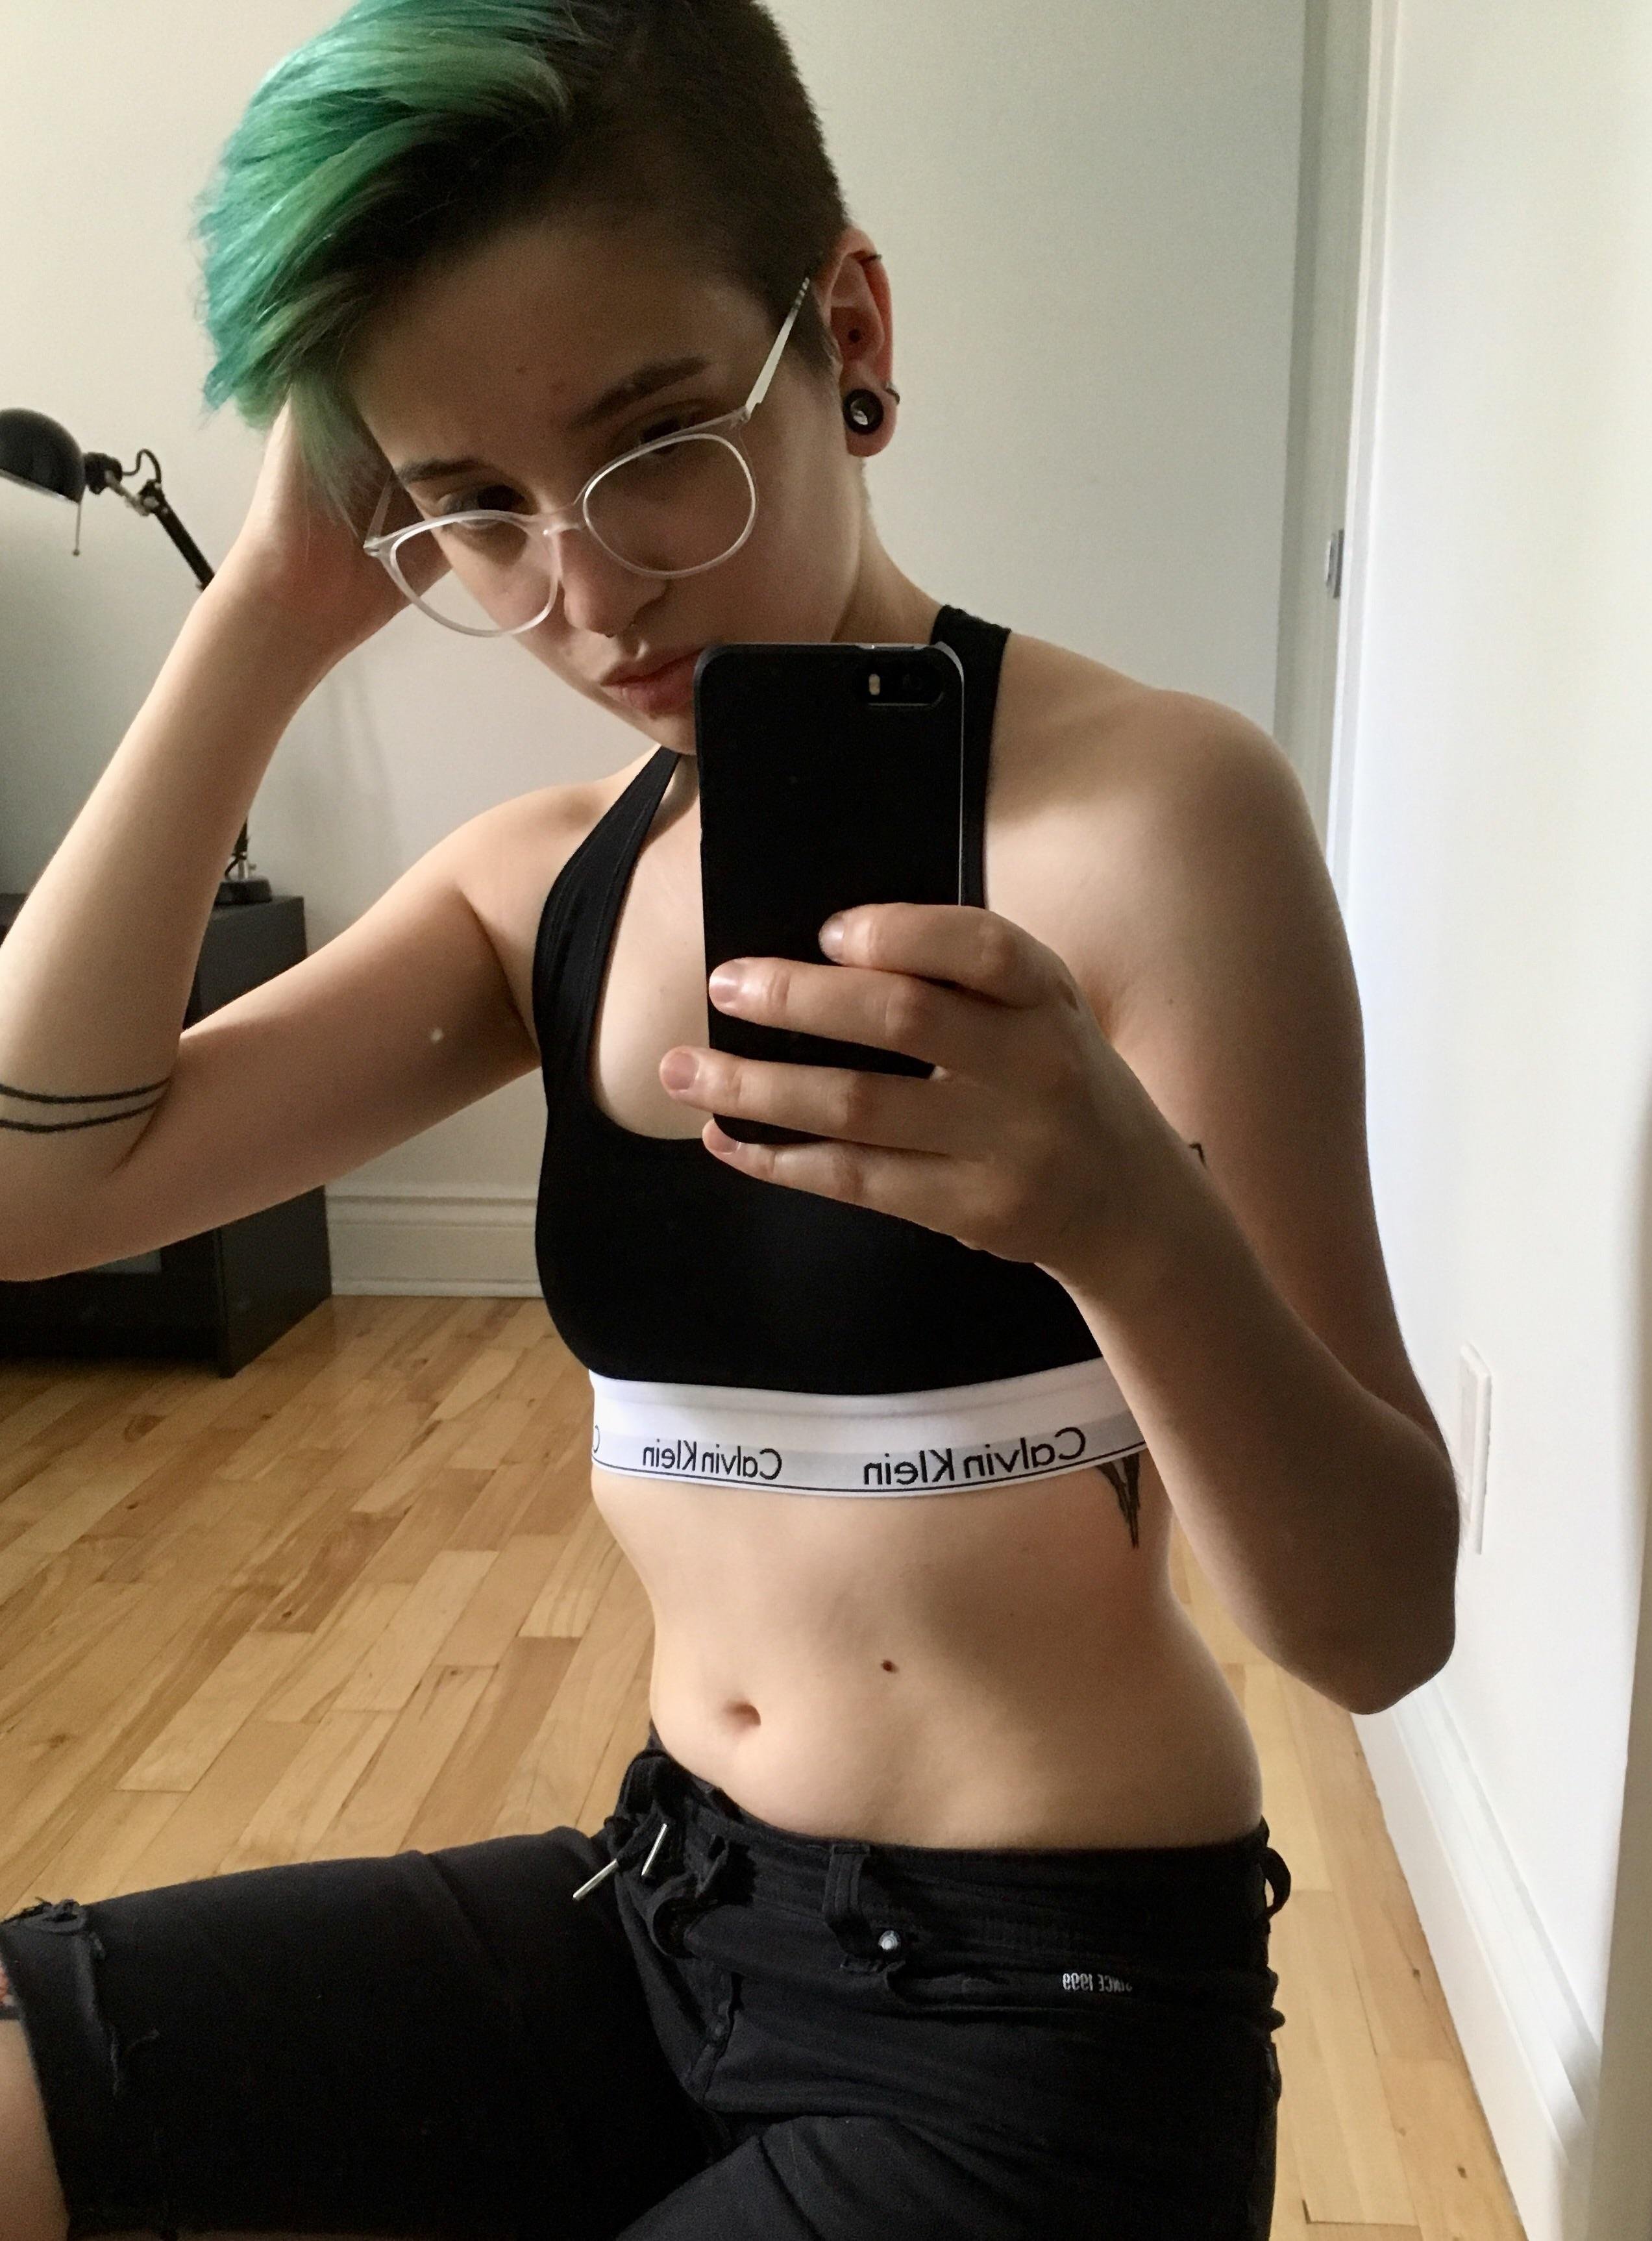 Am I a boi now that I have my Calvin Klein top?